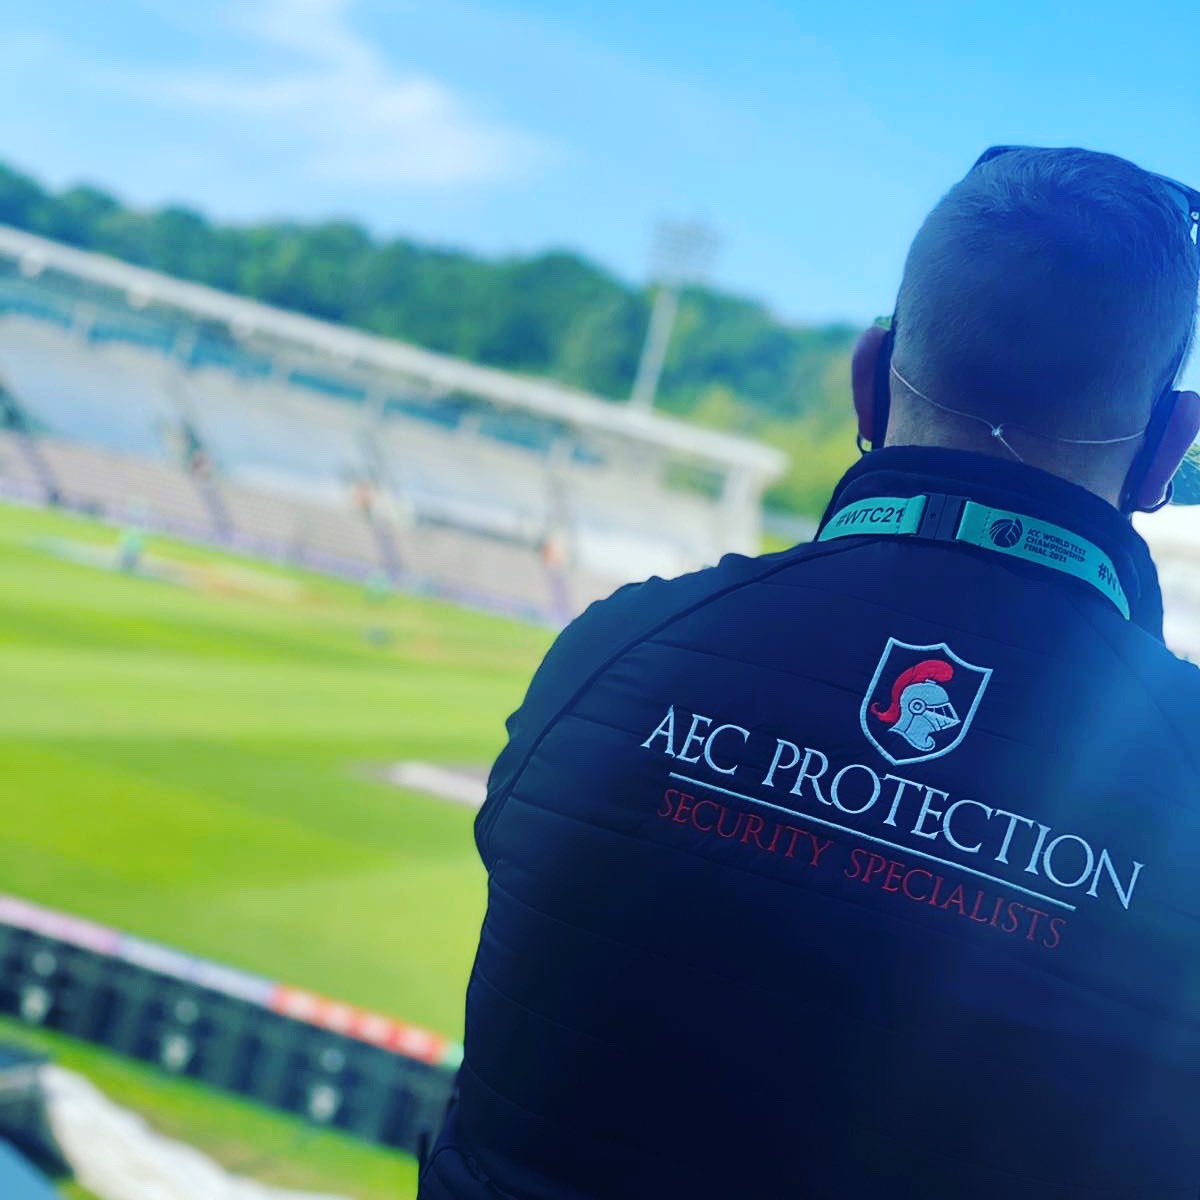 ☀️The sun is shining for @aecprotection on Day 6 of the The ICC World Test Championship Final 🏏 @theageasbowl 🇮🇳 India v New Zealand 🇳🇿 

#WTC21 #PlayerProtection #EventSecurity #Cricket #TestFinal